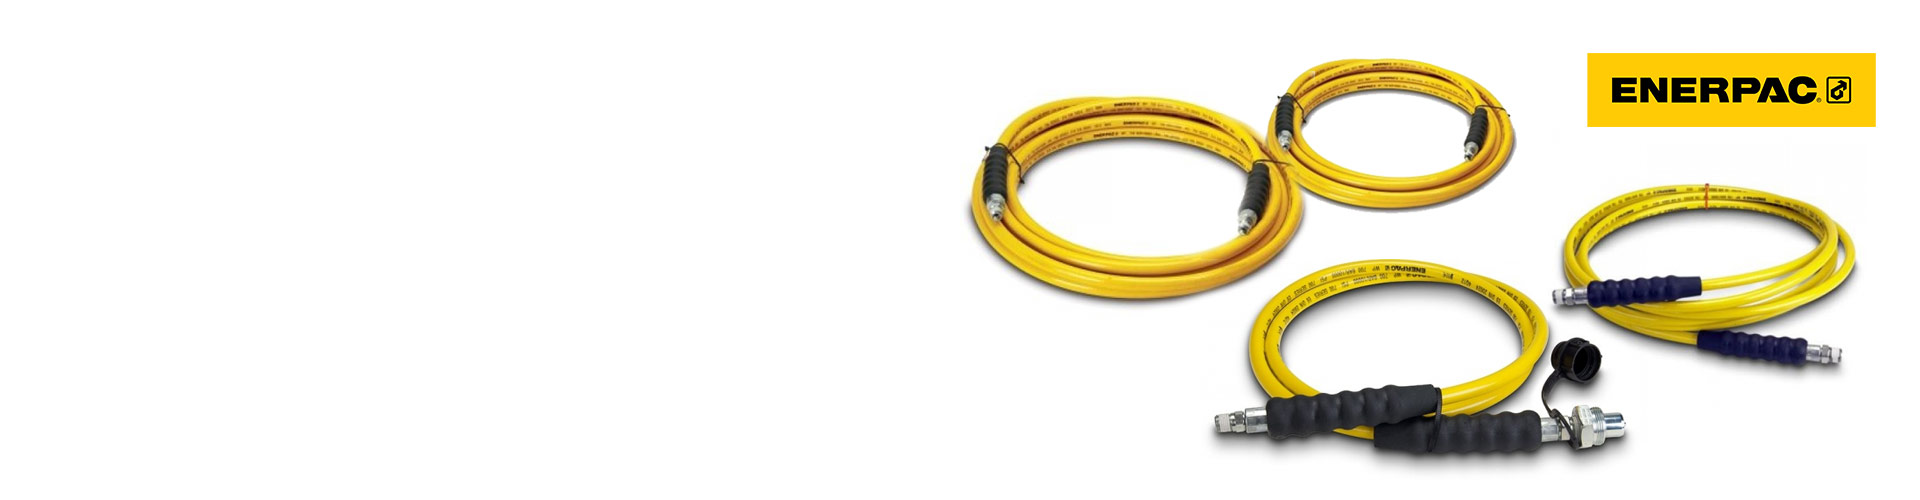 Enerpac Thermoplastic - Wire Braid Products in Stock